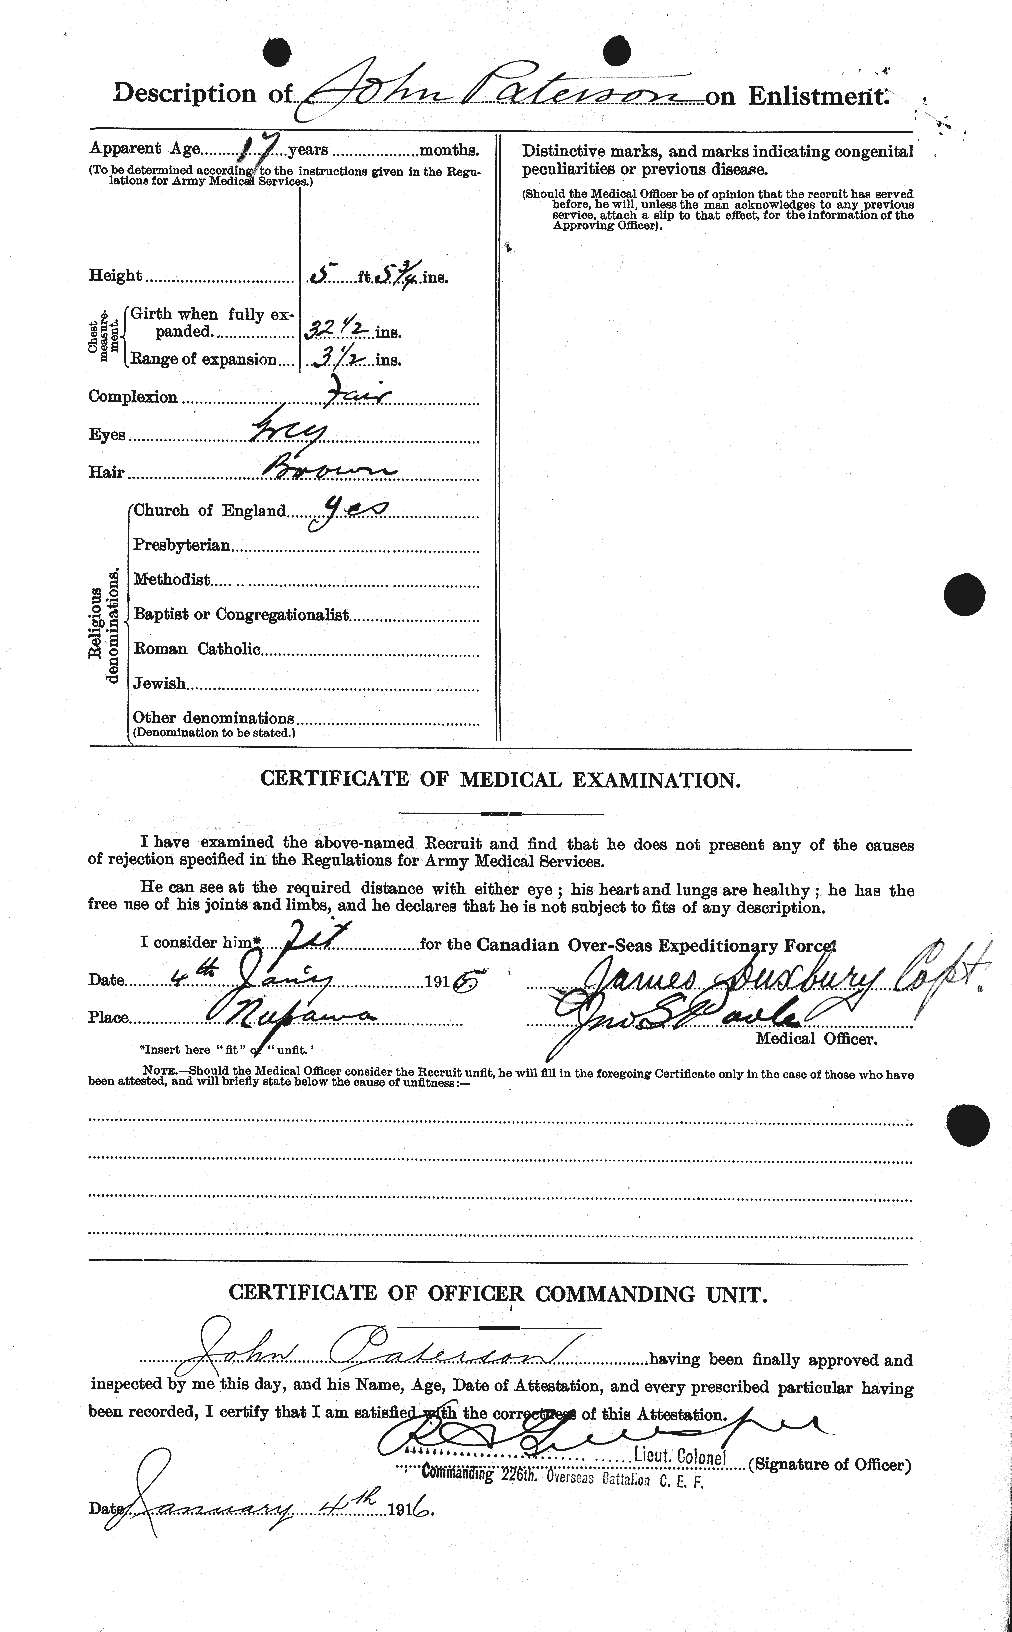 Personnel Records of the First World War - CEF 567681b